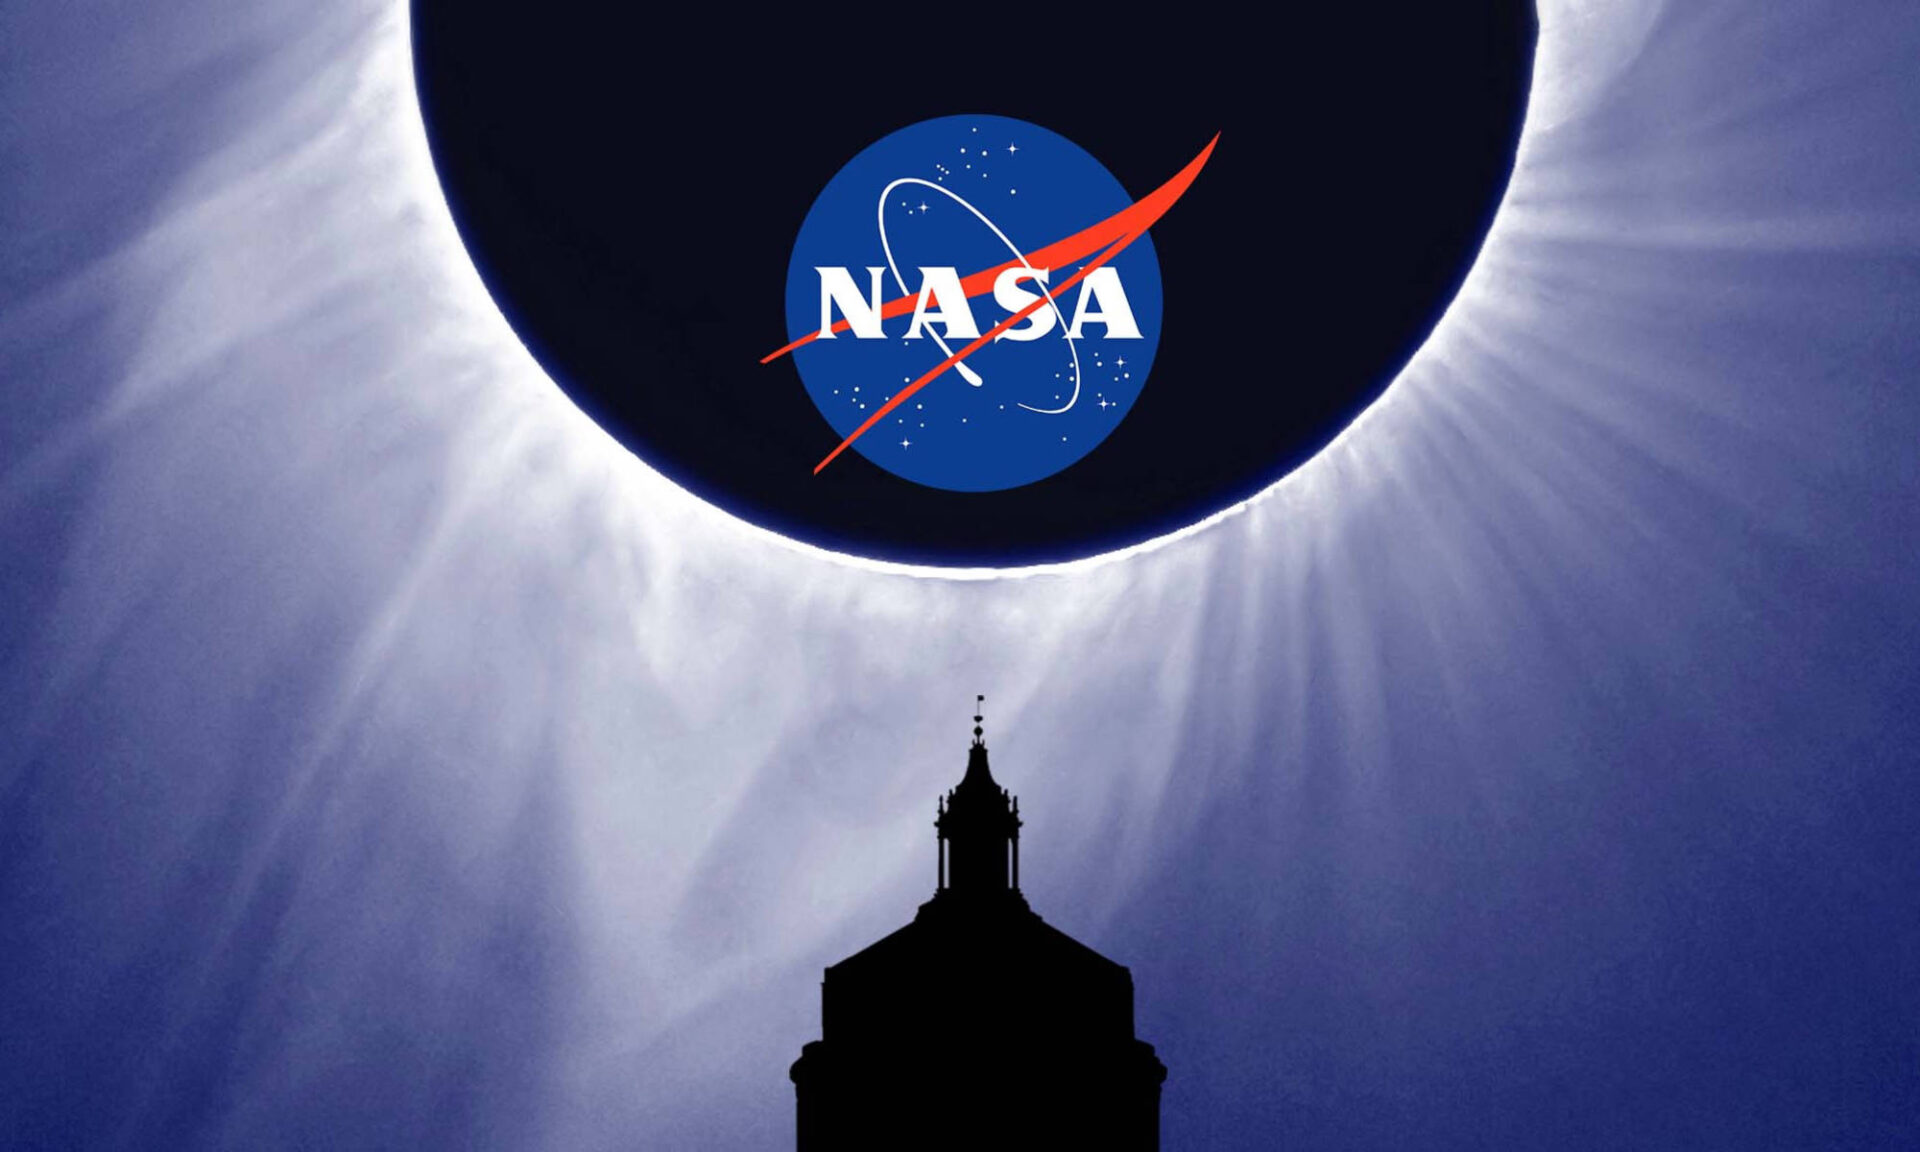 Illustration of the sun during totality with the NASA logo superimposed on it and the outline of the Rush Rhees Library tower below.